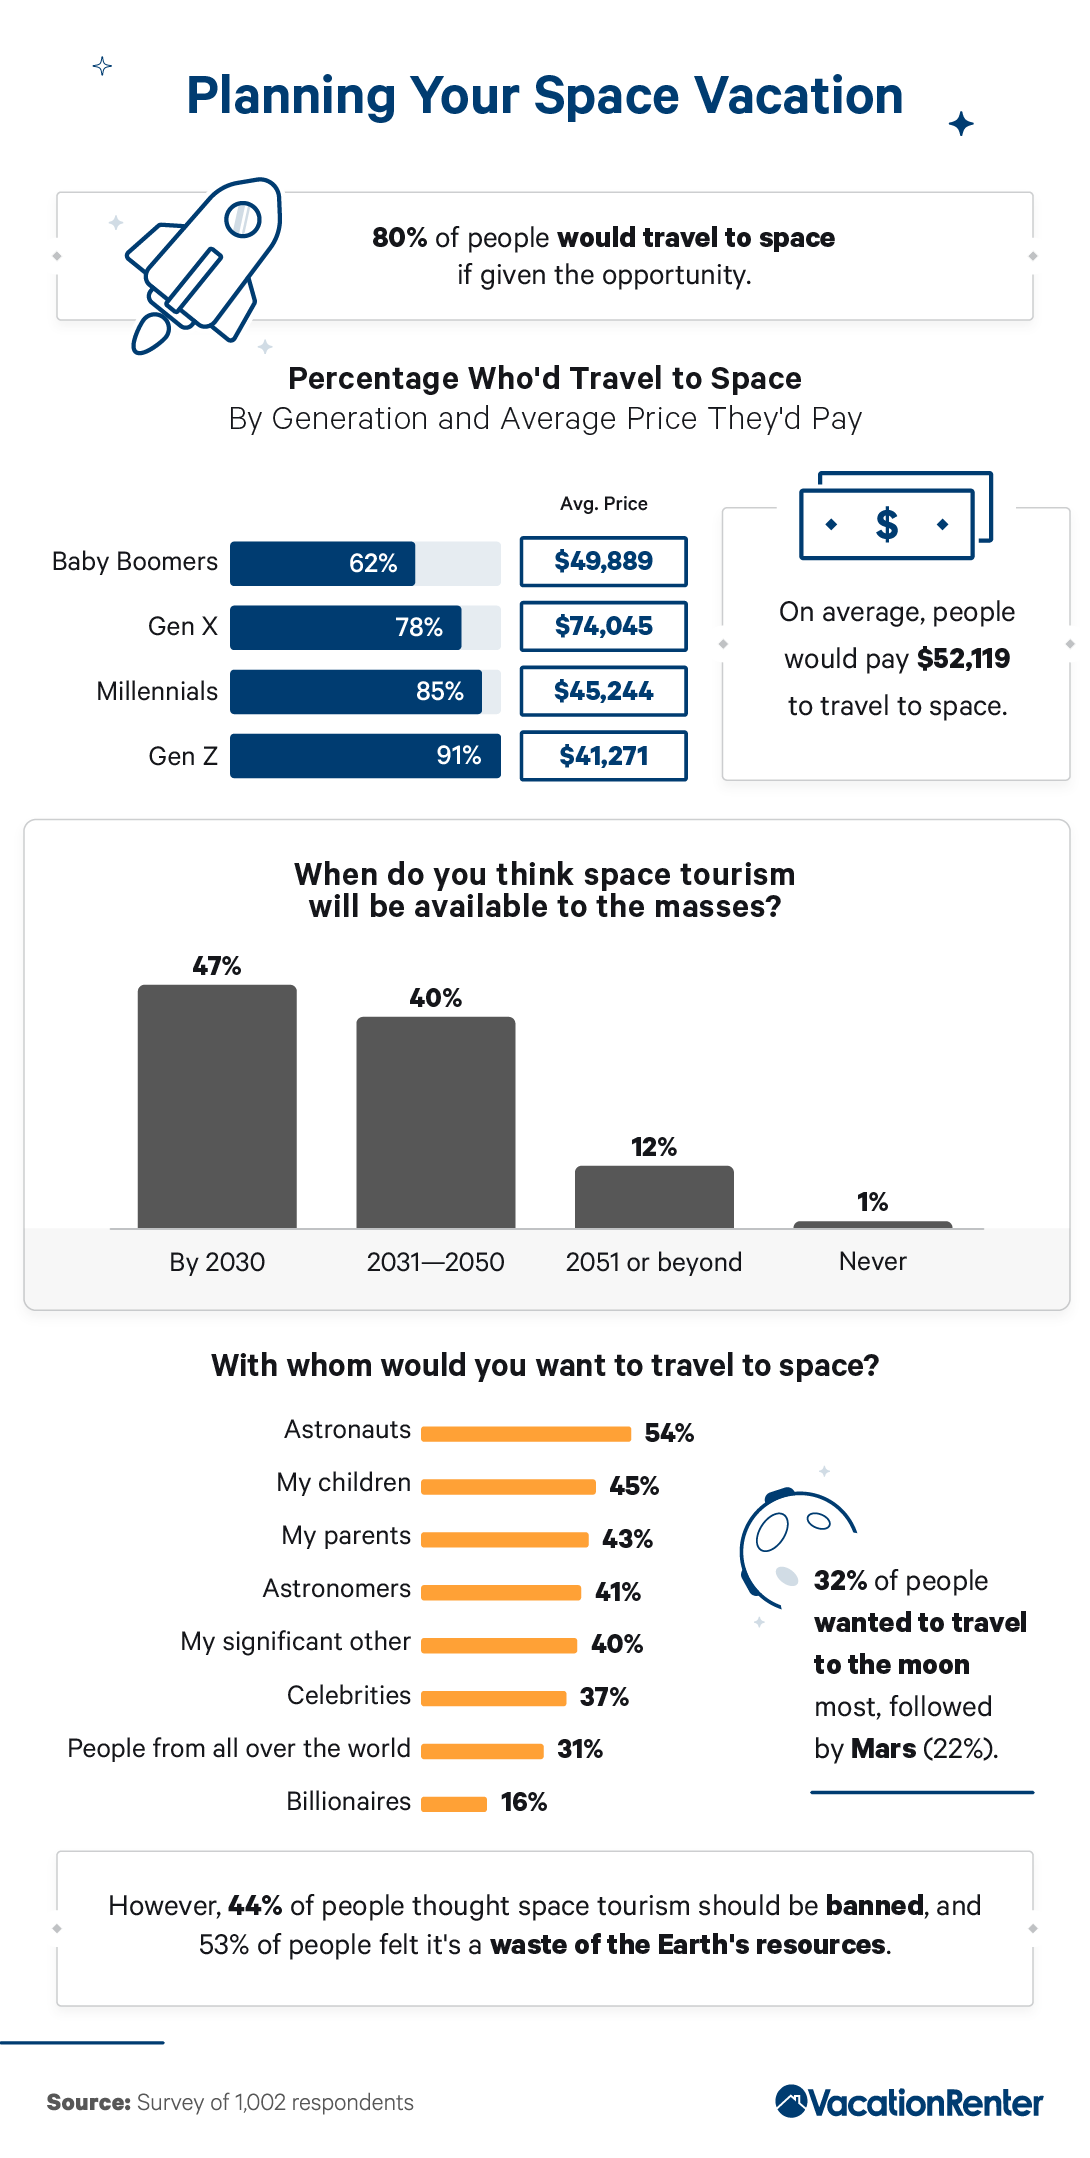 Planning your space vacation infographic.